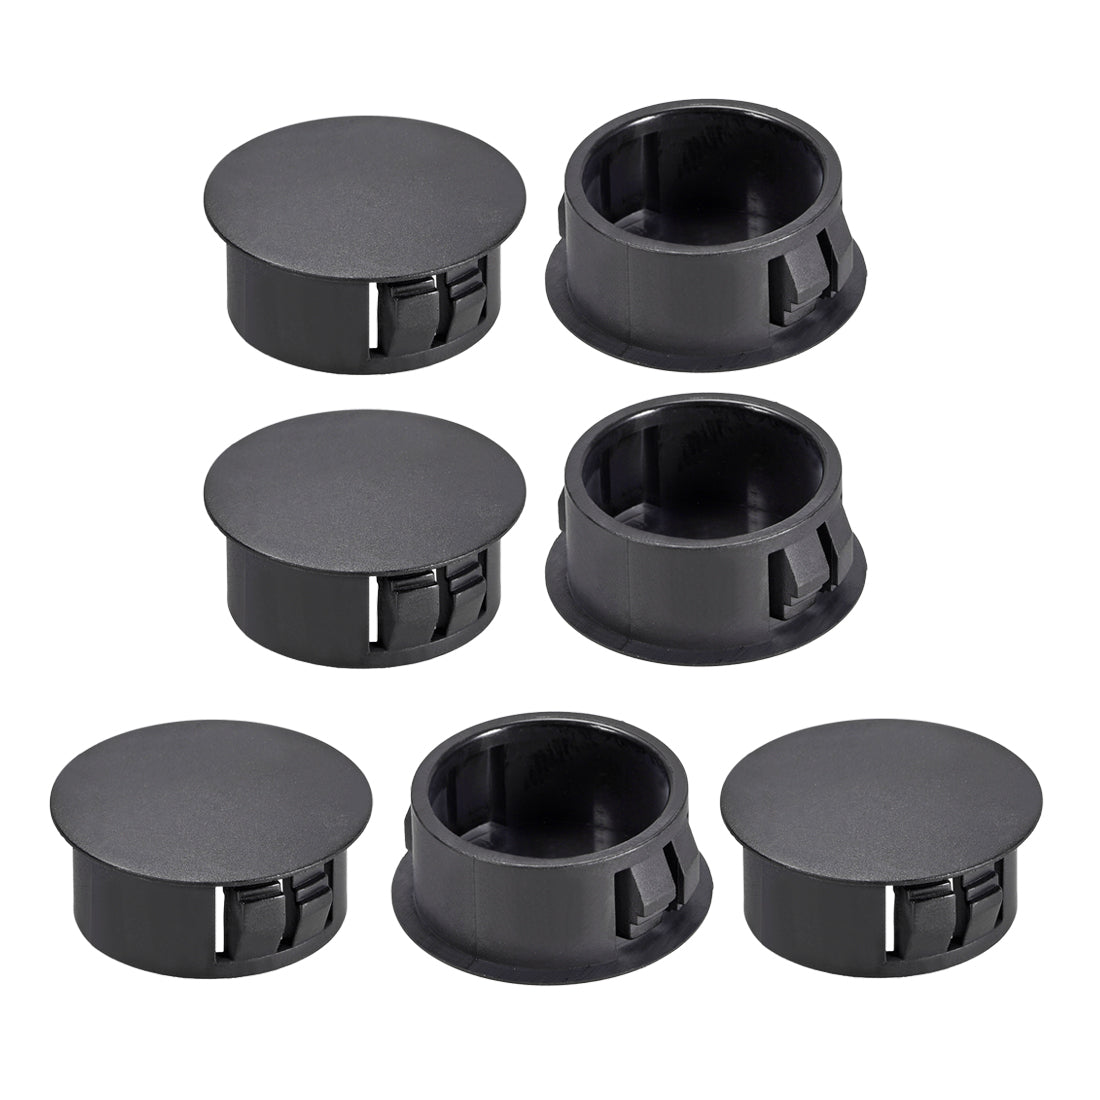 Uxcell Uxcell 13mm Mounted Dia Snap in Cable Hose Bushing Grommet Protector Black 100pcs